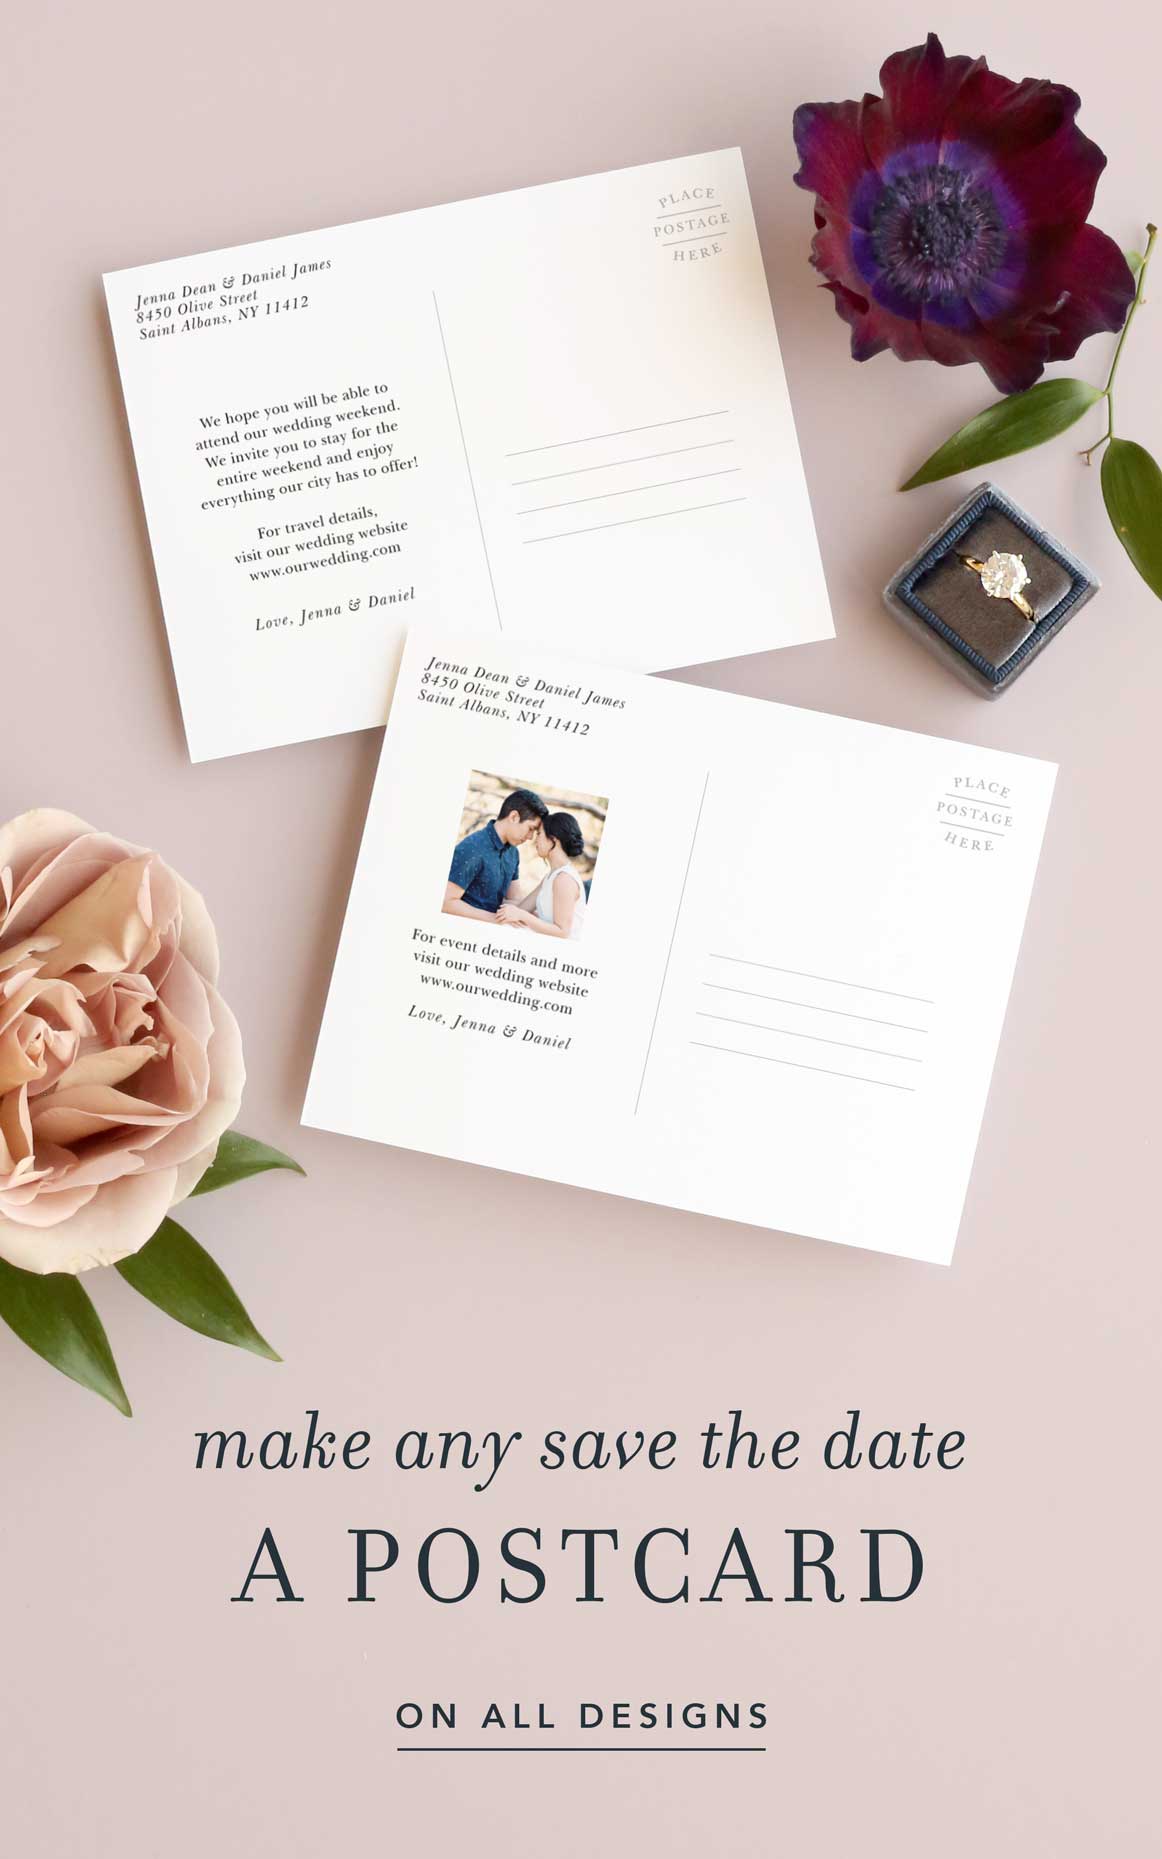 save the date postcard back template